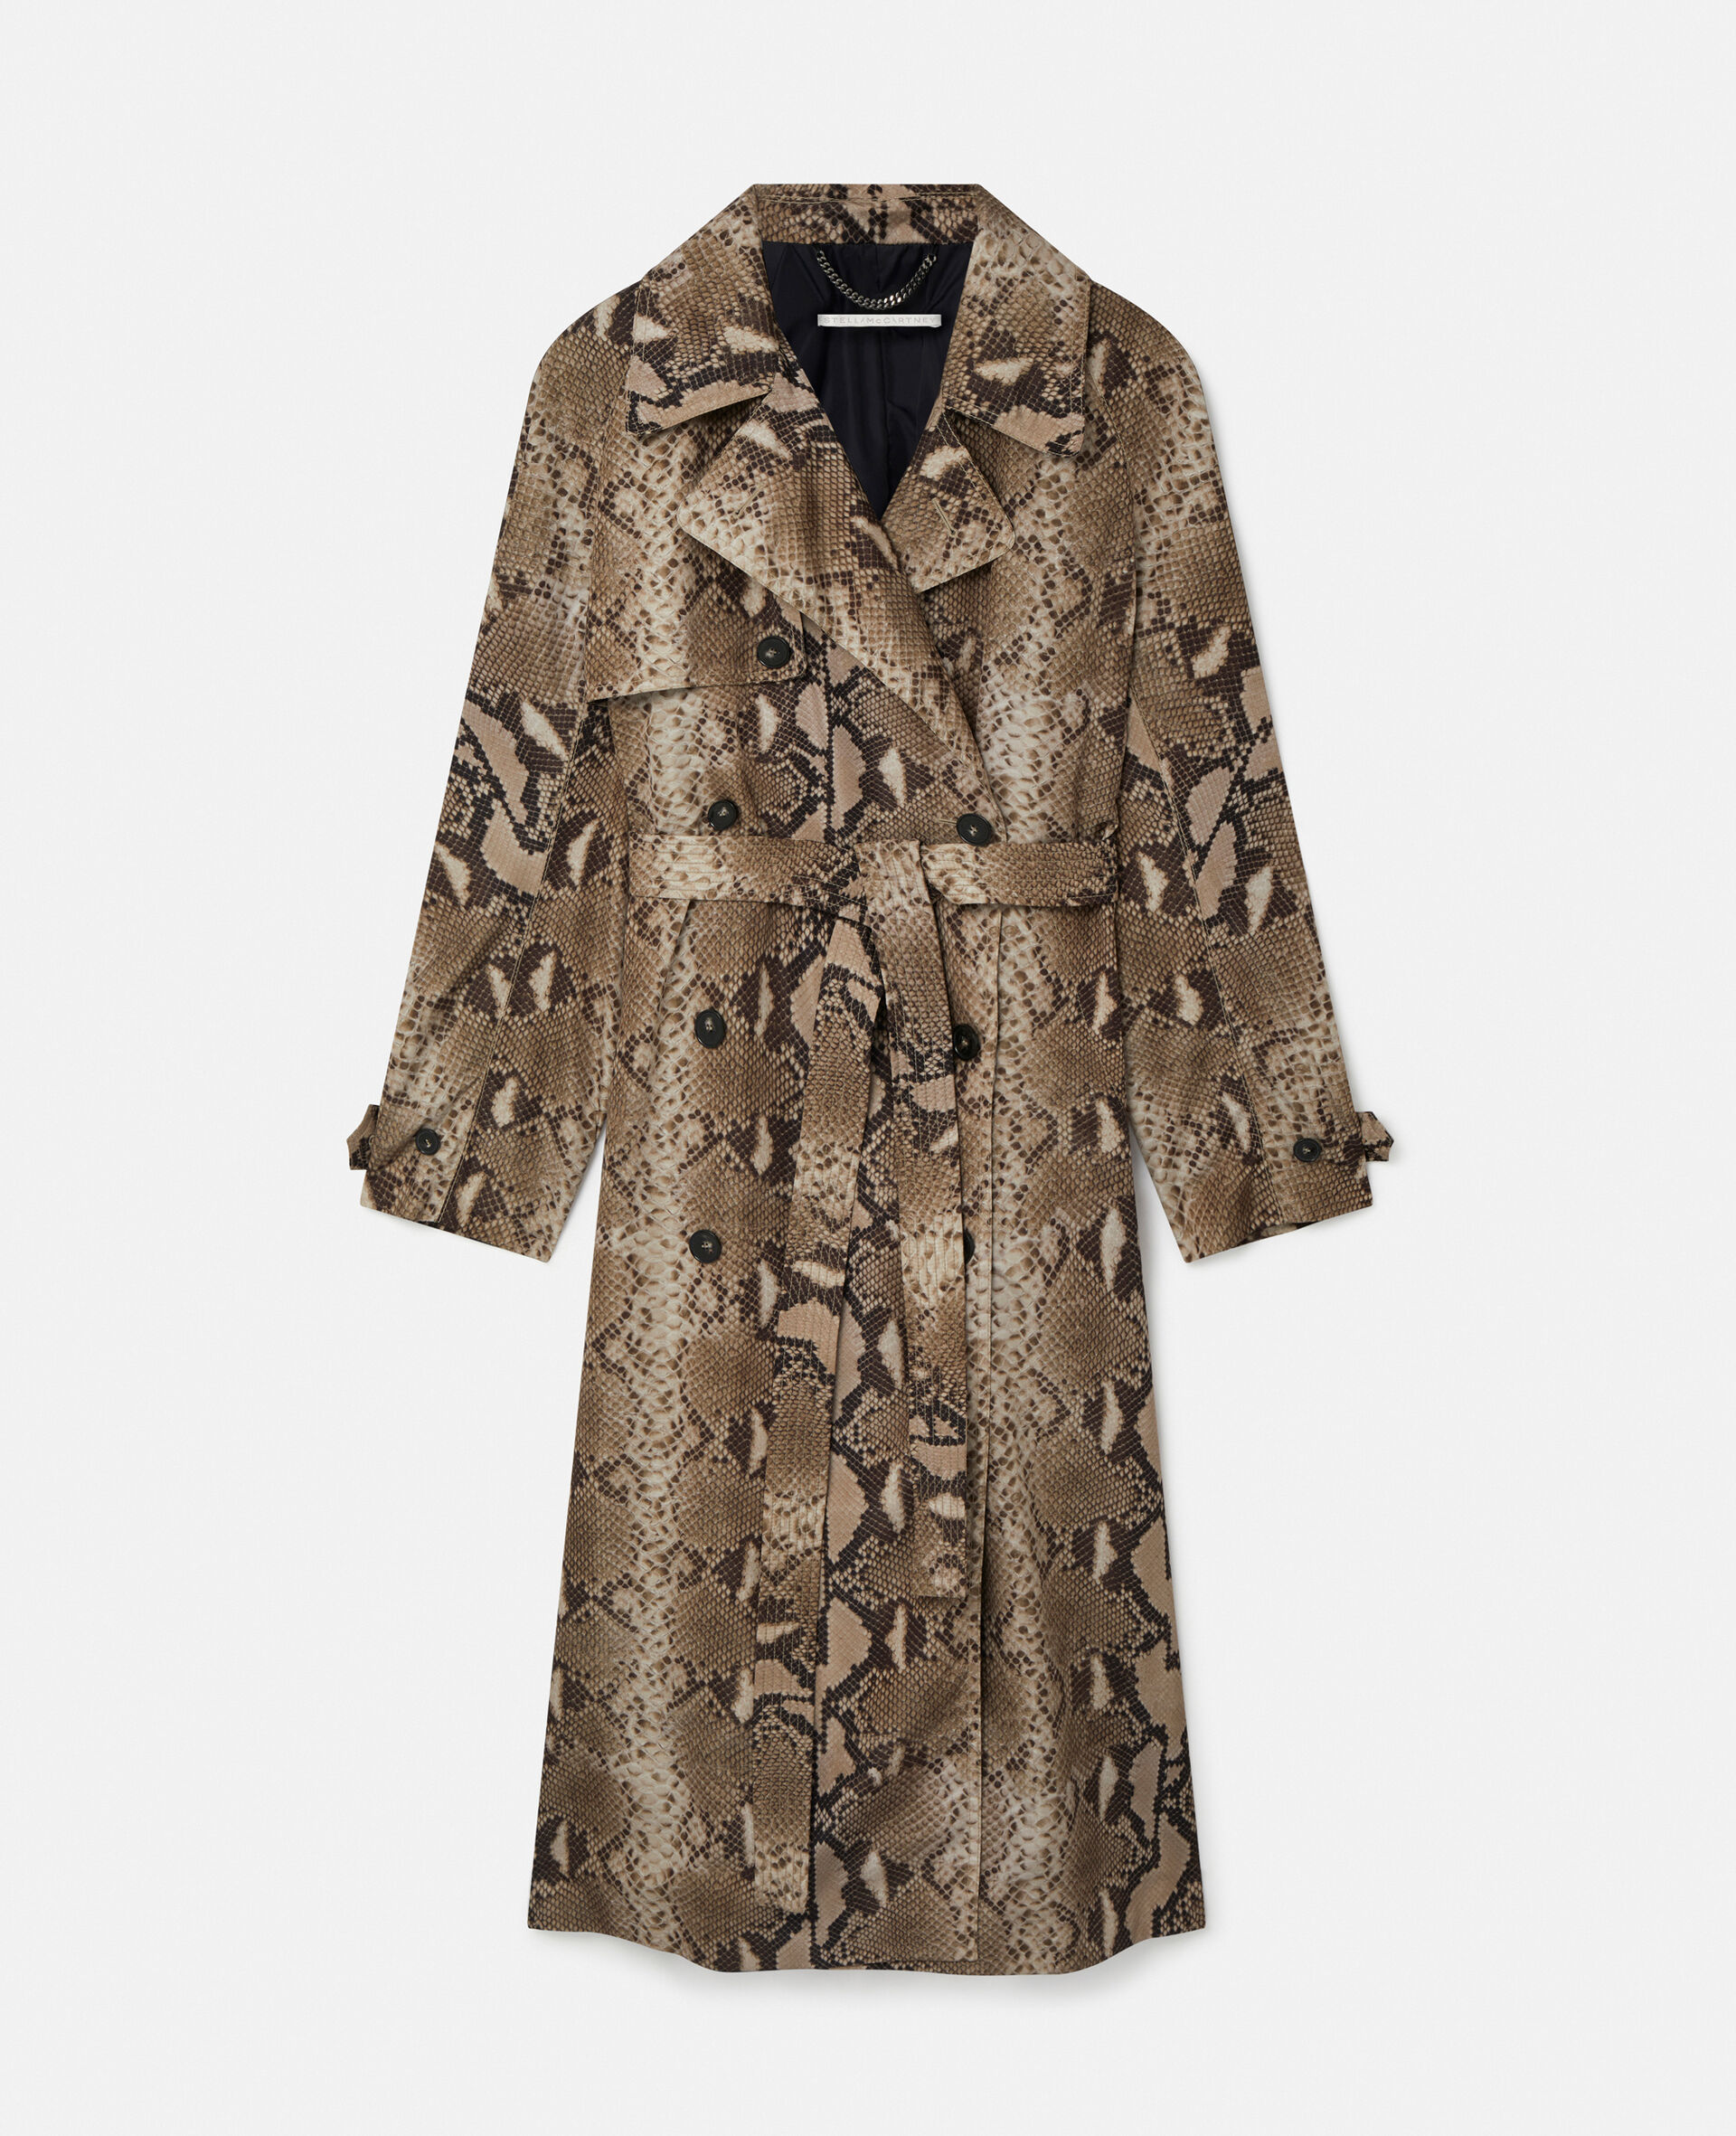 Python Print Belted Trench Coat-Multicolour-large image number 0